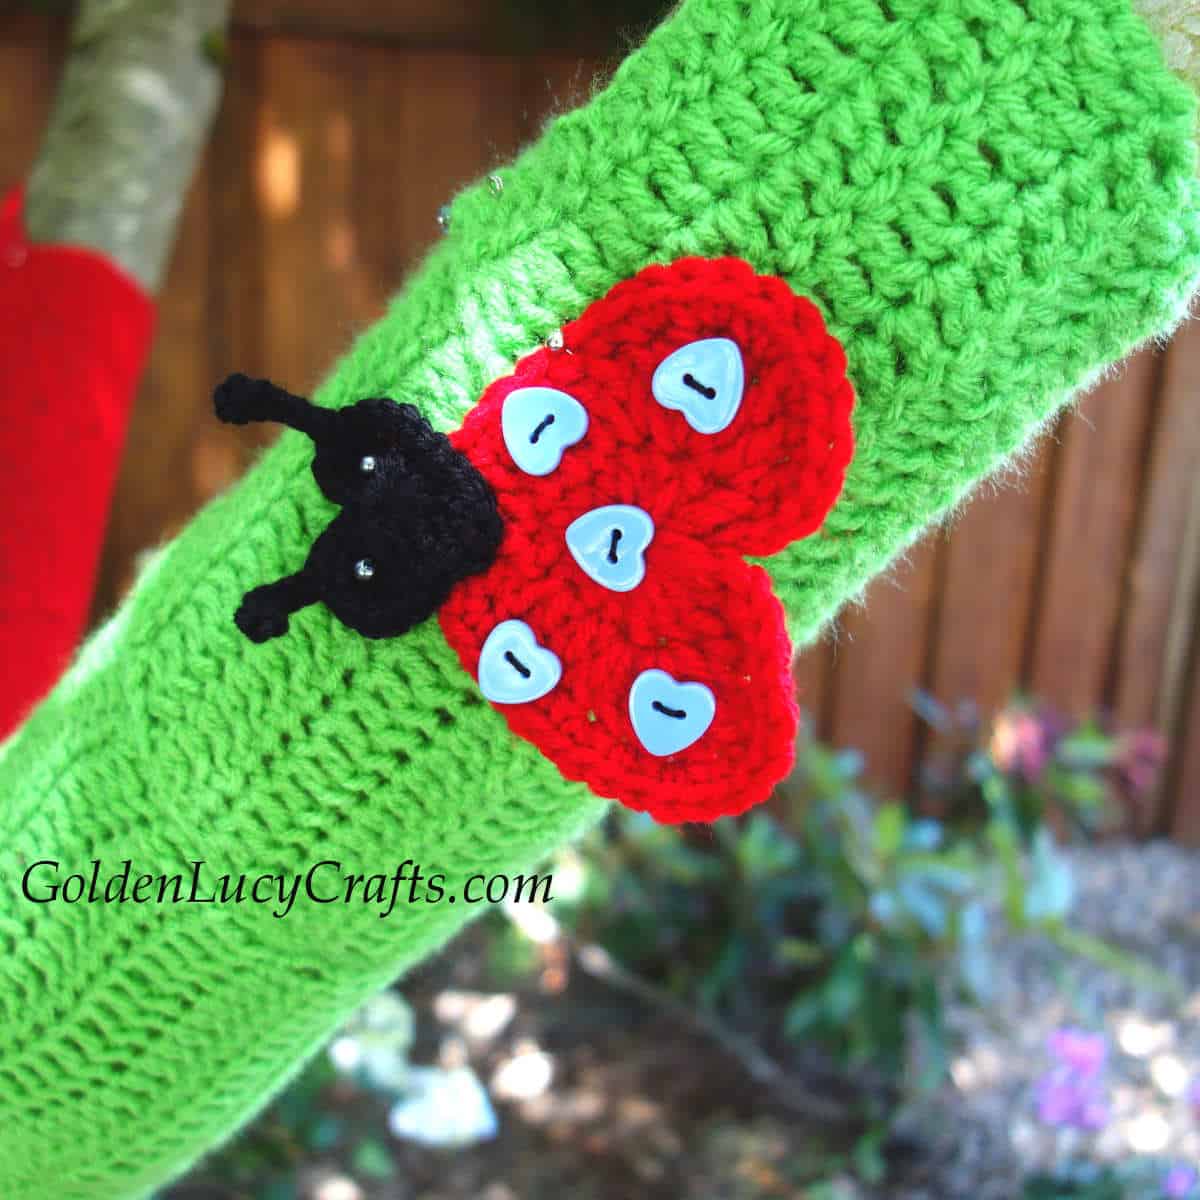 Tree branch wrapped in green crocheted fabric embellished with ladybud applique.